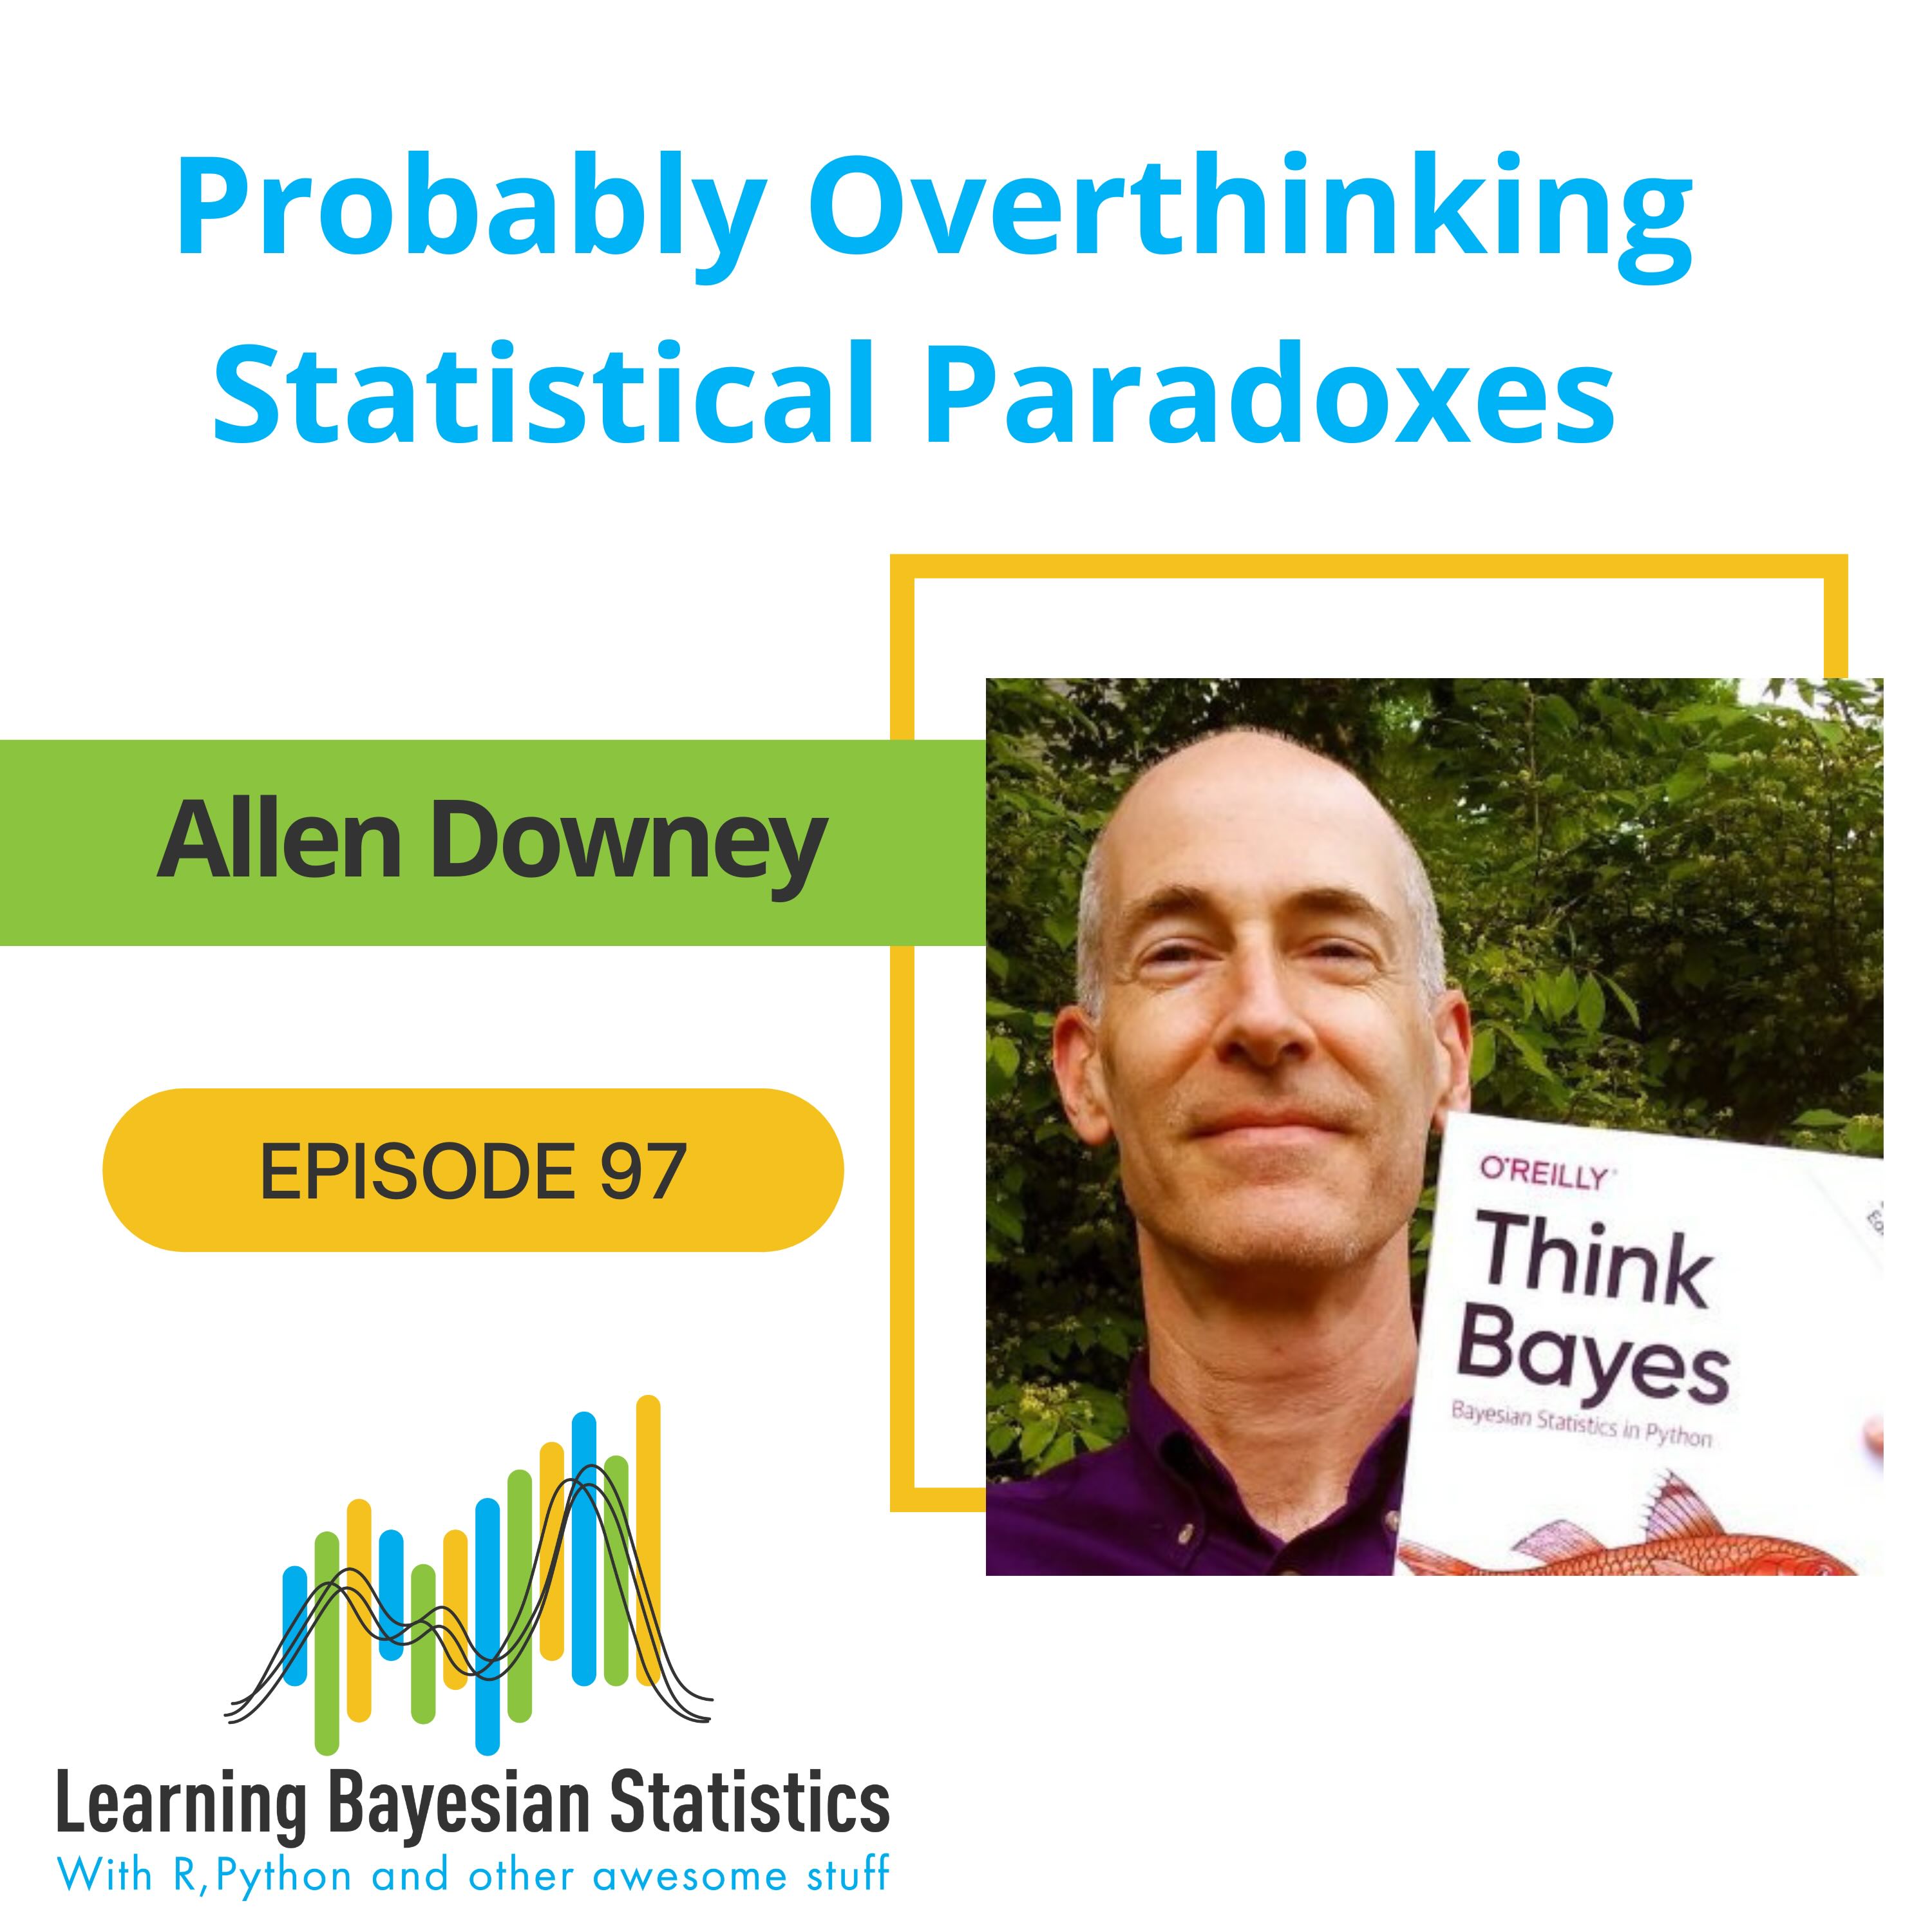 #97 Probably Overthinking Statistical Paradoxes, with Allen Downey